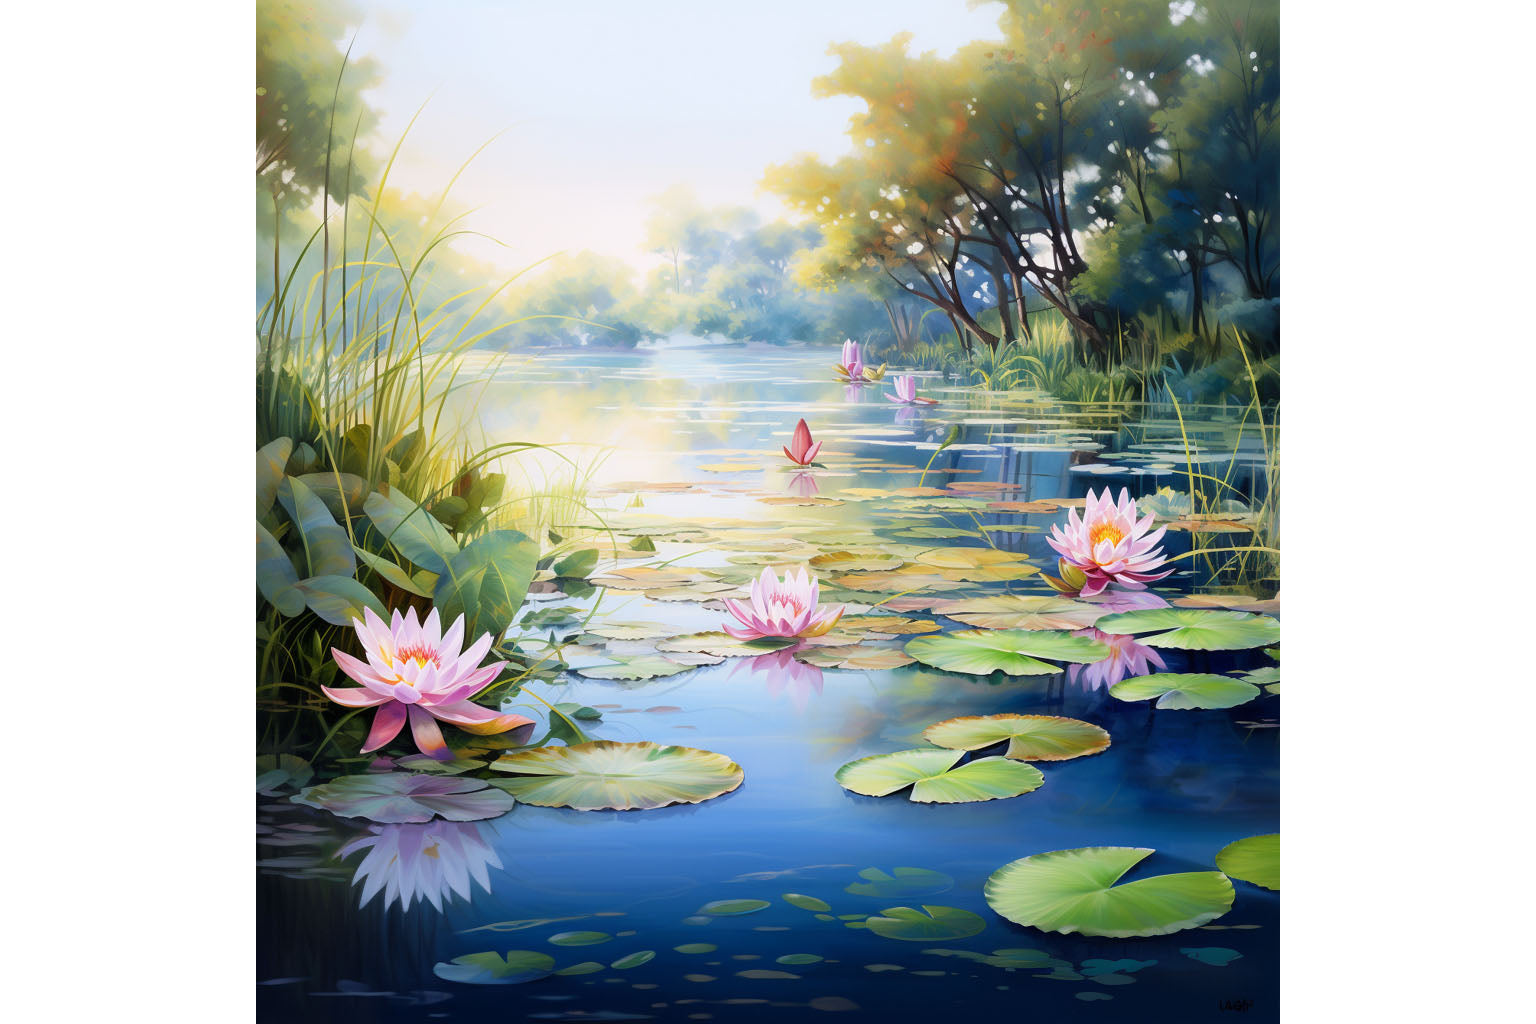 Water lilies on the surface of the water